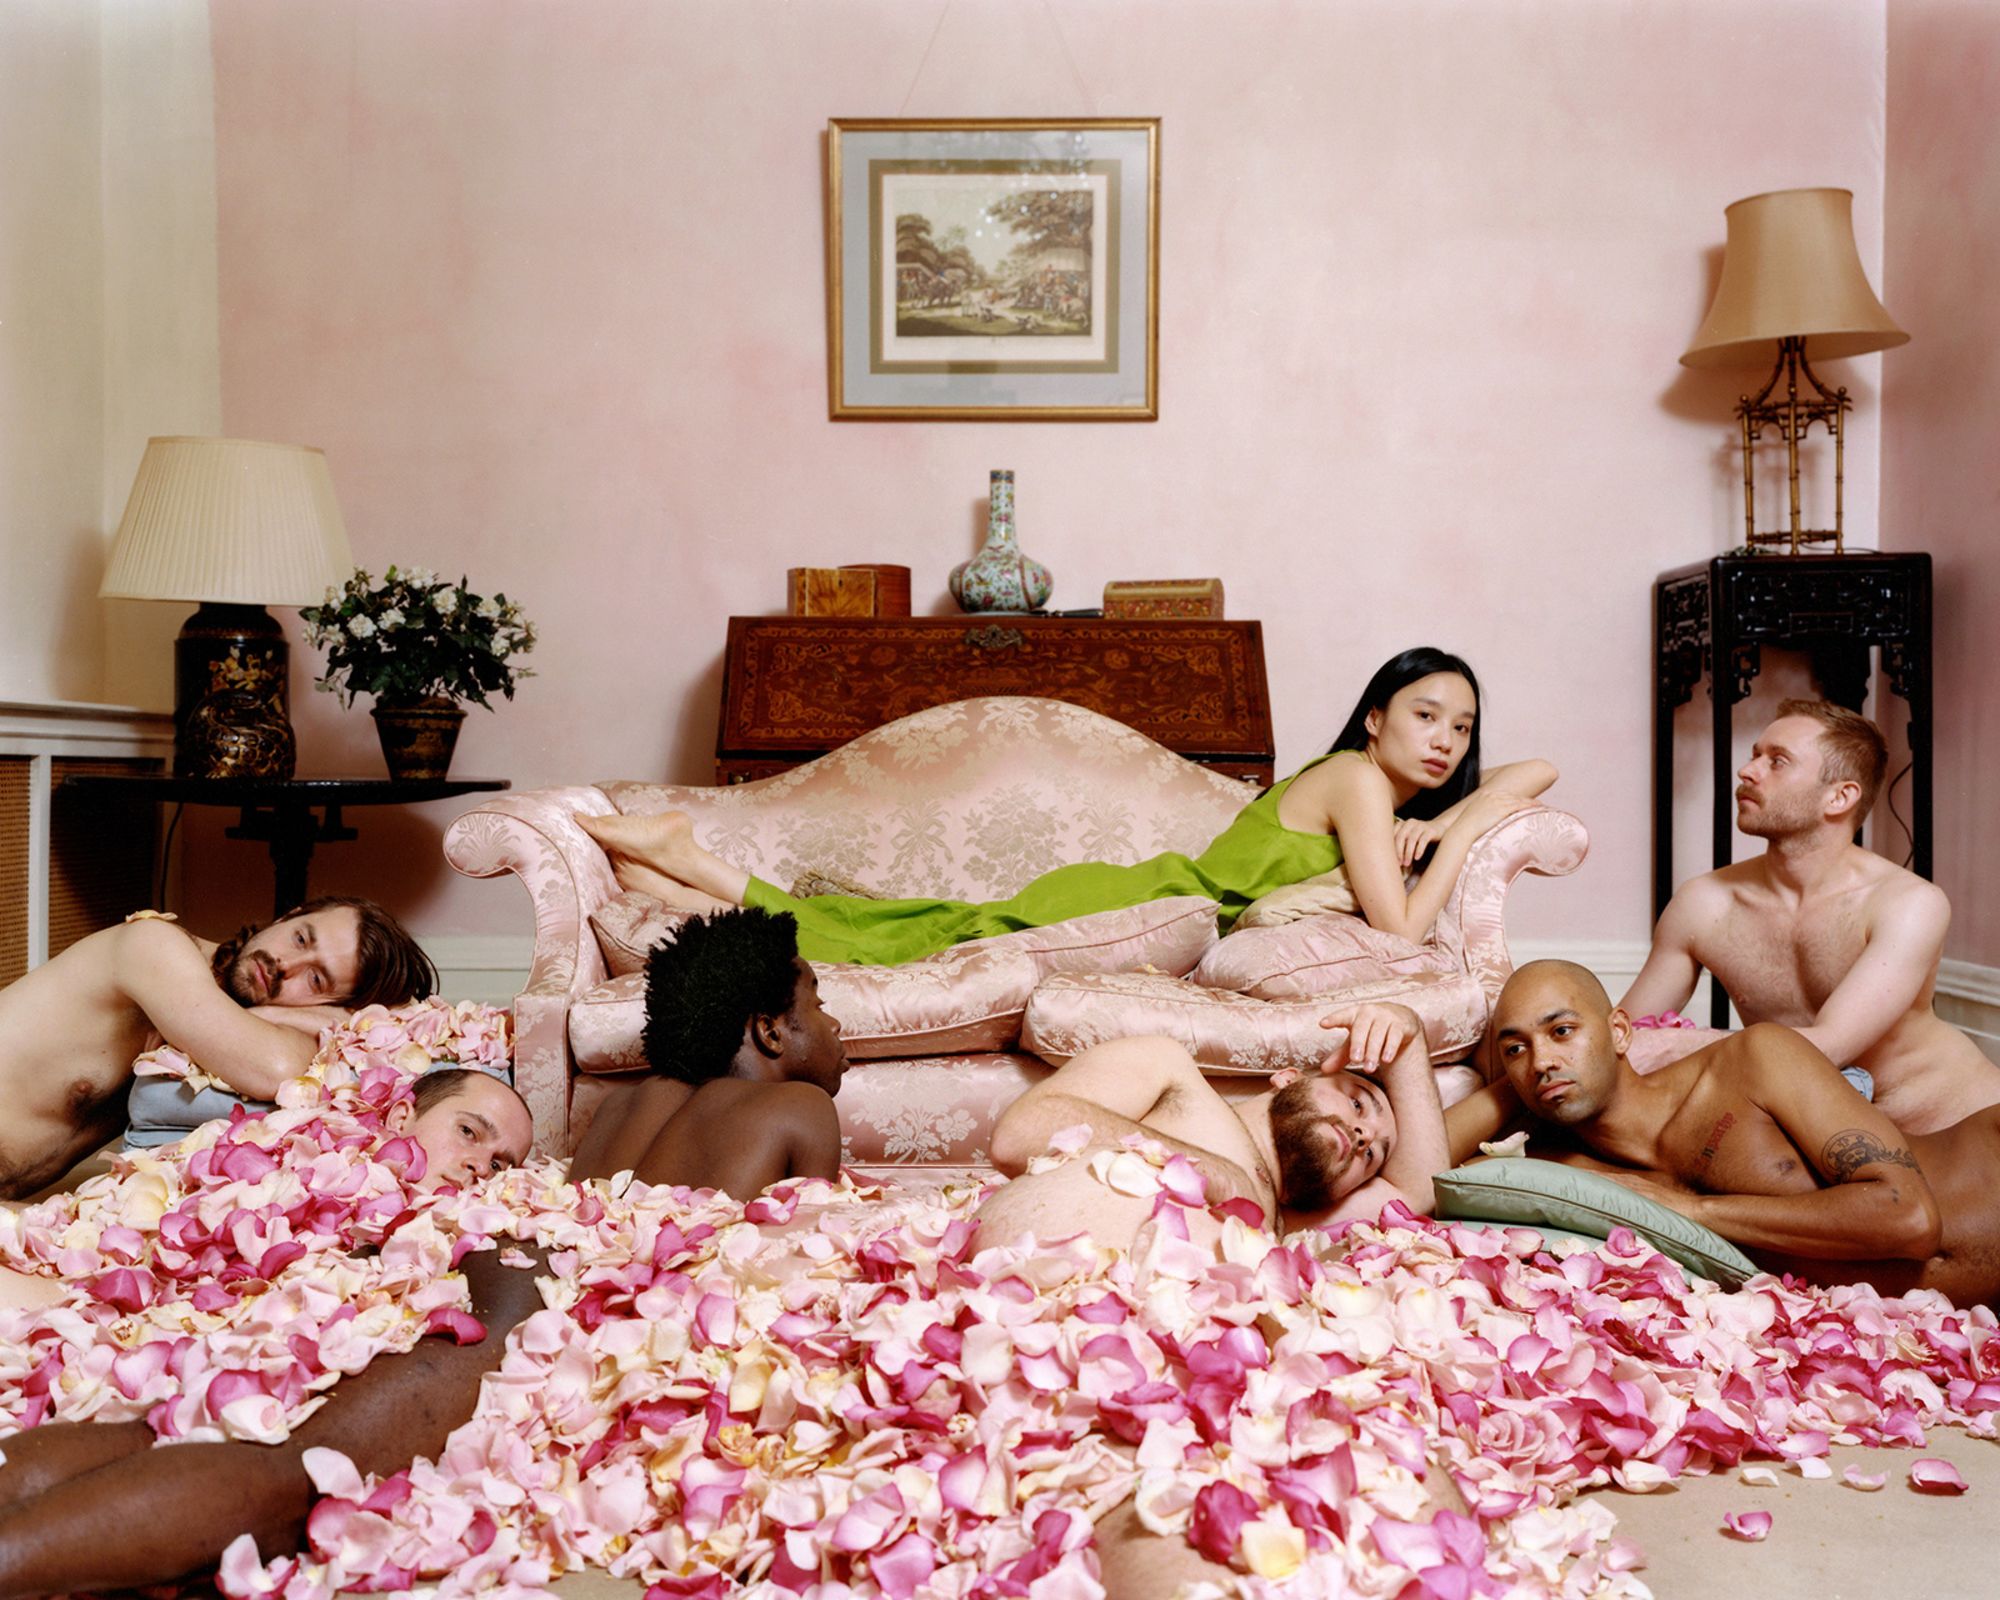 "The Smothering Dream," by Chinese photographer Yushi Li.